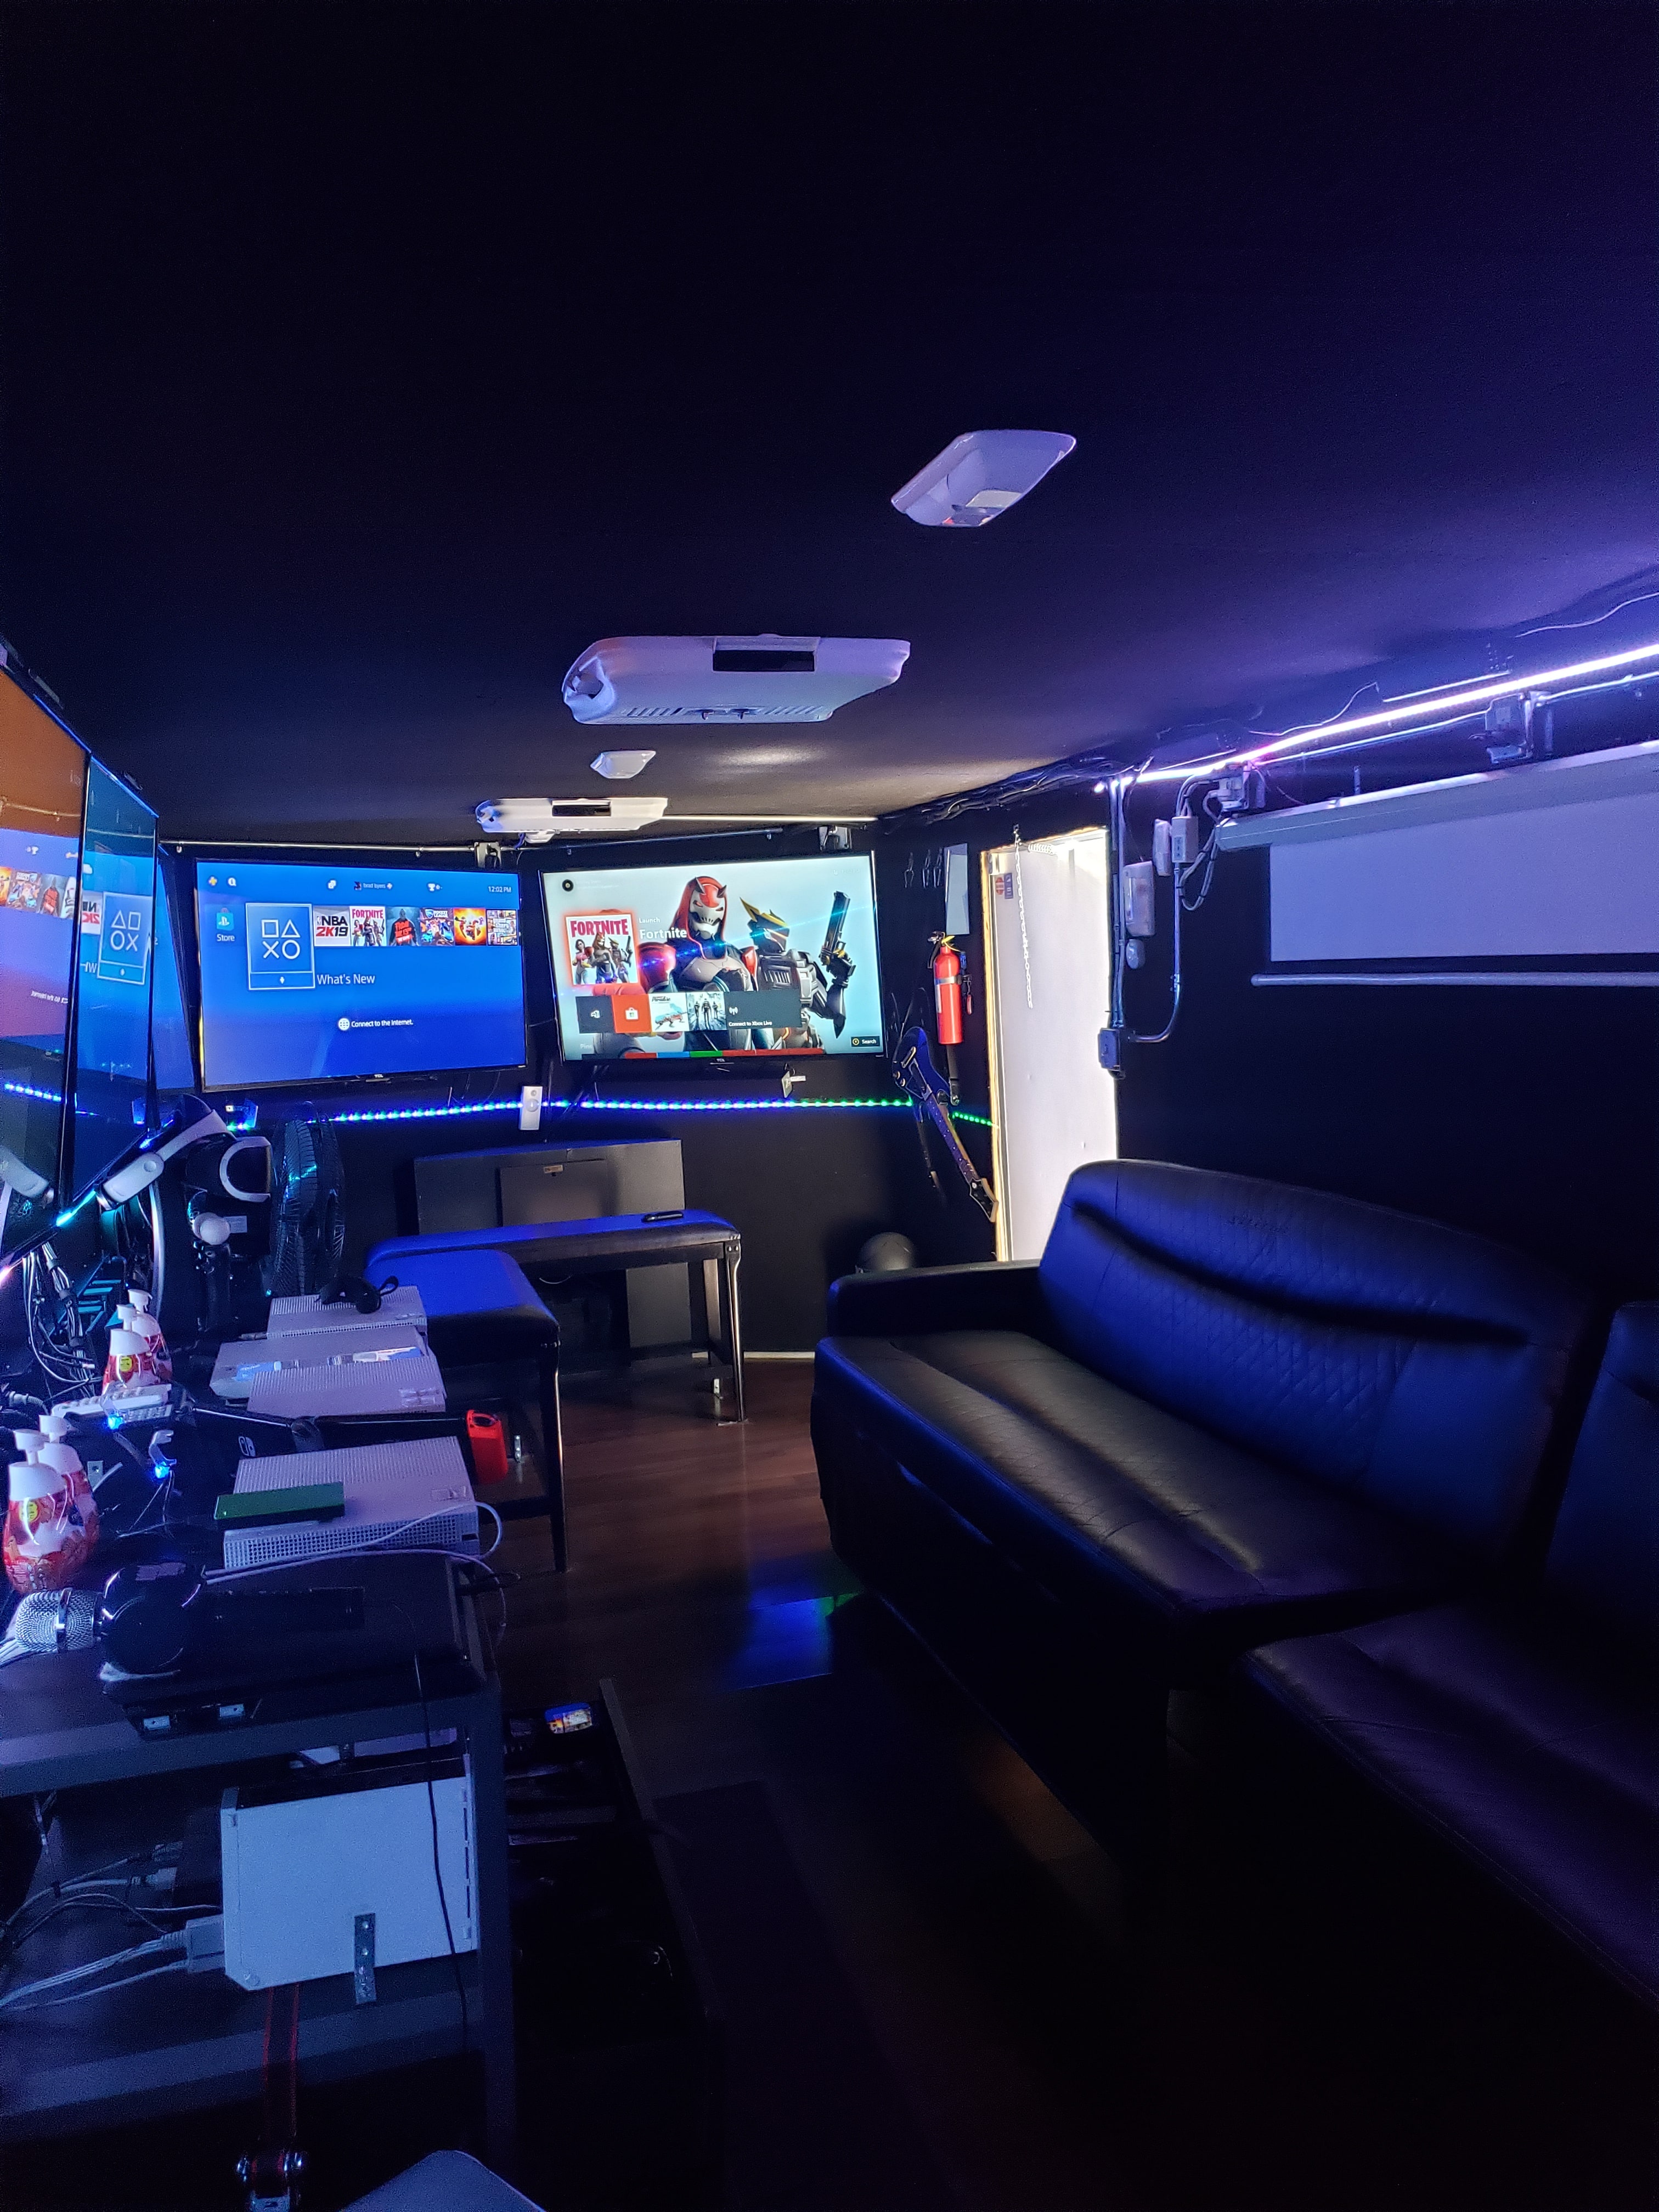 game truck with fortnite